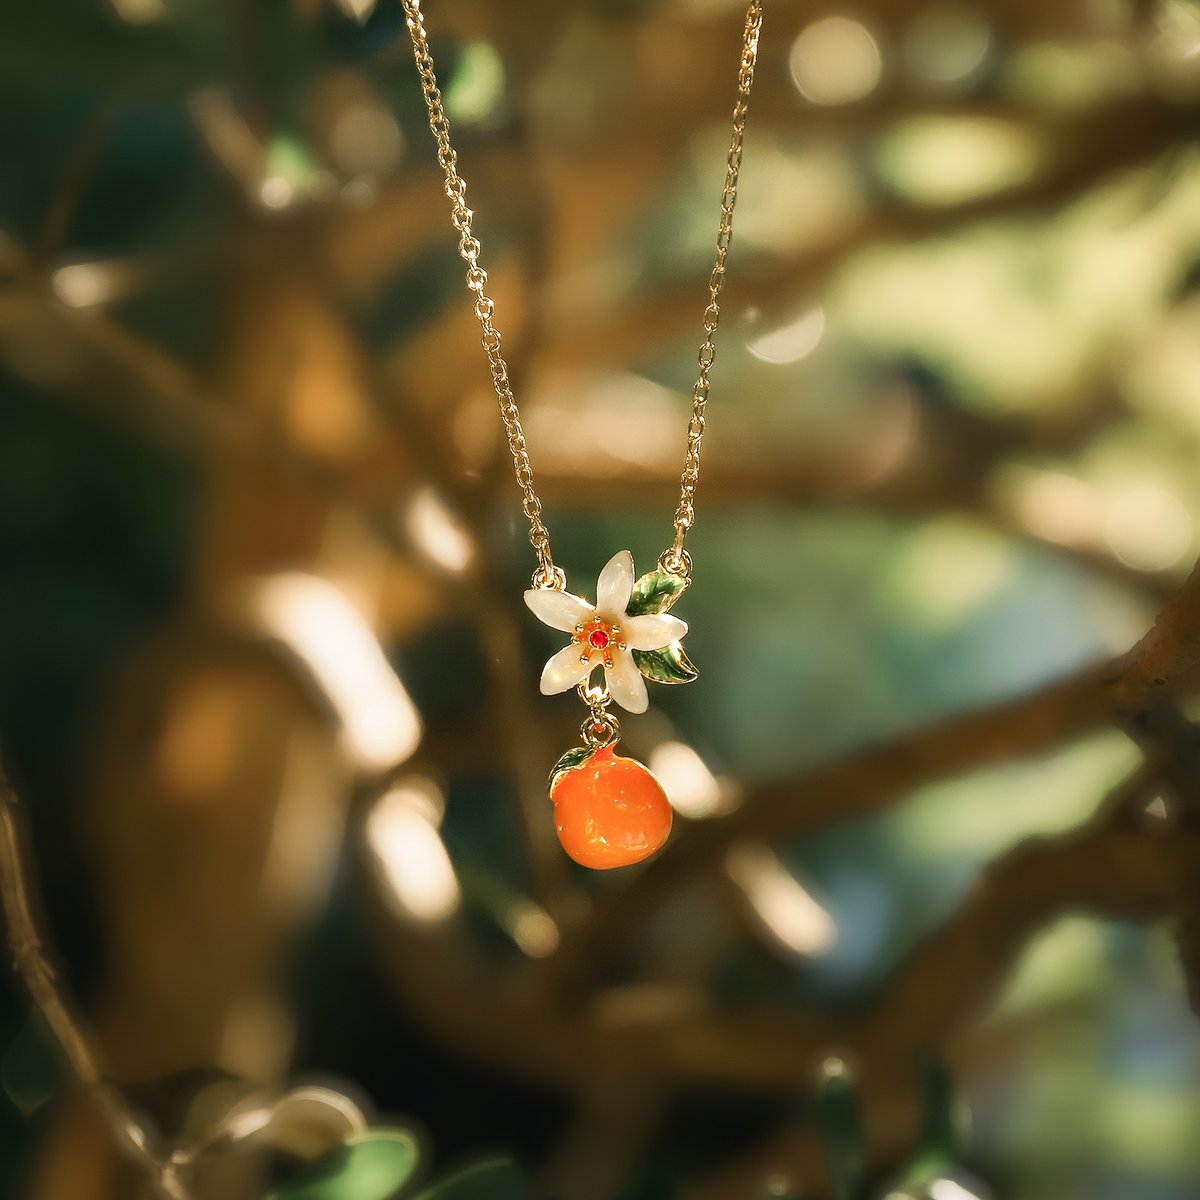 🍊Regardless of the materials or design, this Orange Necklace is a vibrant and eye-catching accessory that commands attention with its bold hue.

Shop in the link🔗selenichast.com/collections/or…
#selenichast #selenichastjewel #orangenecklace #necklaces #fashionstyle #giftideas